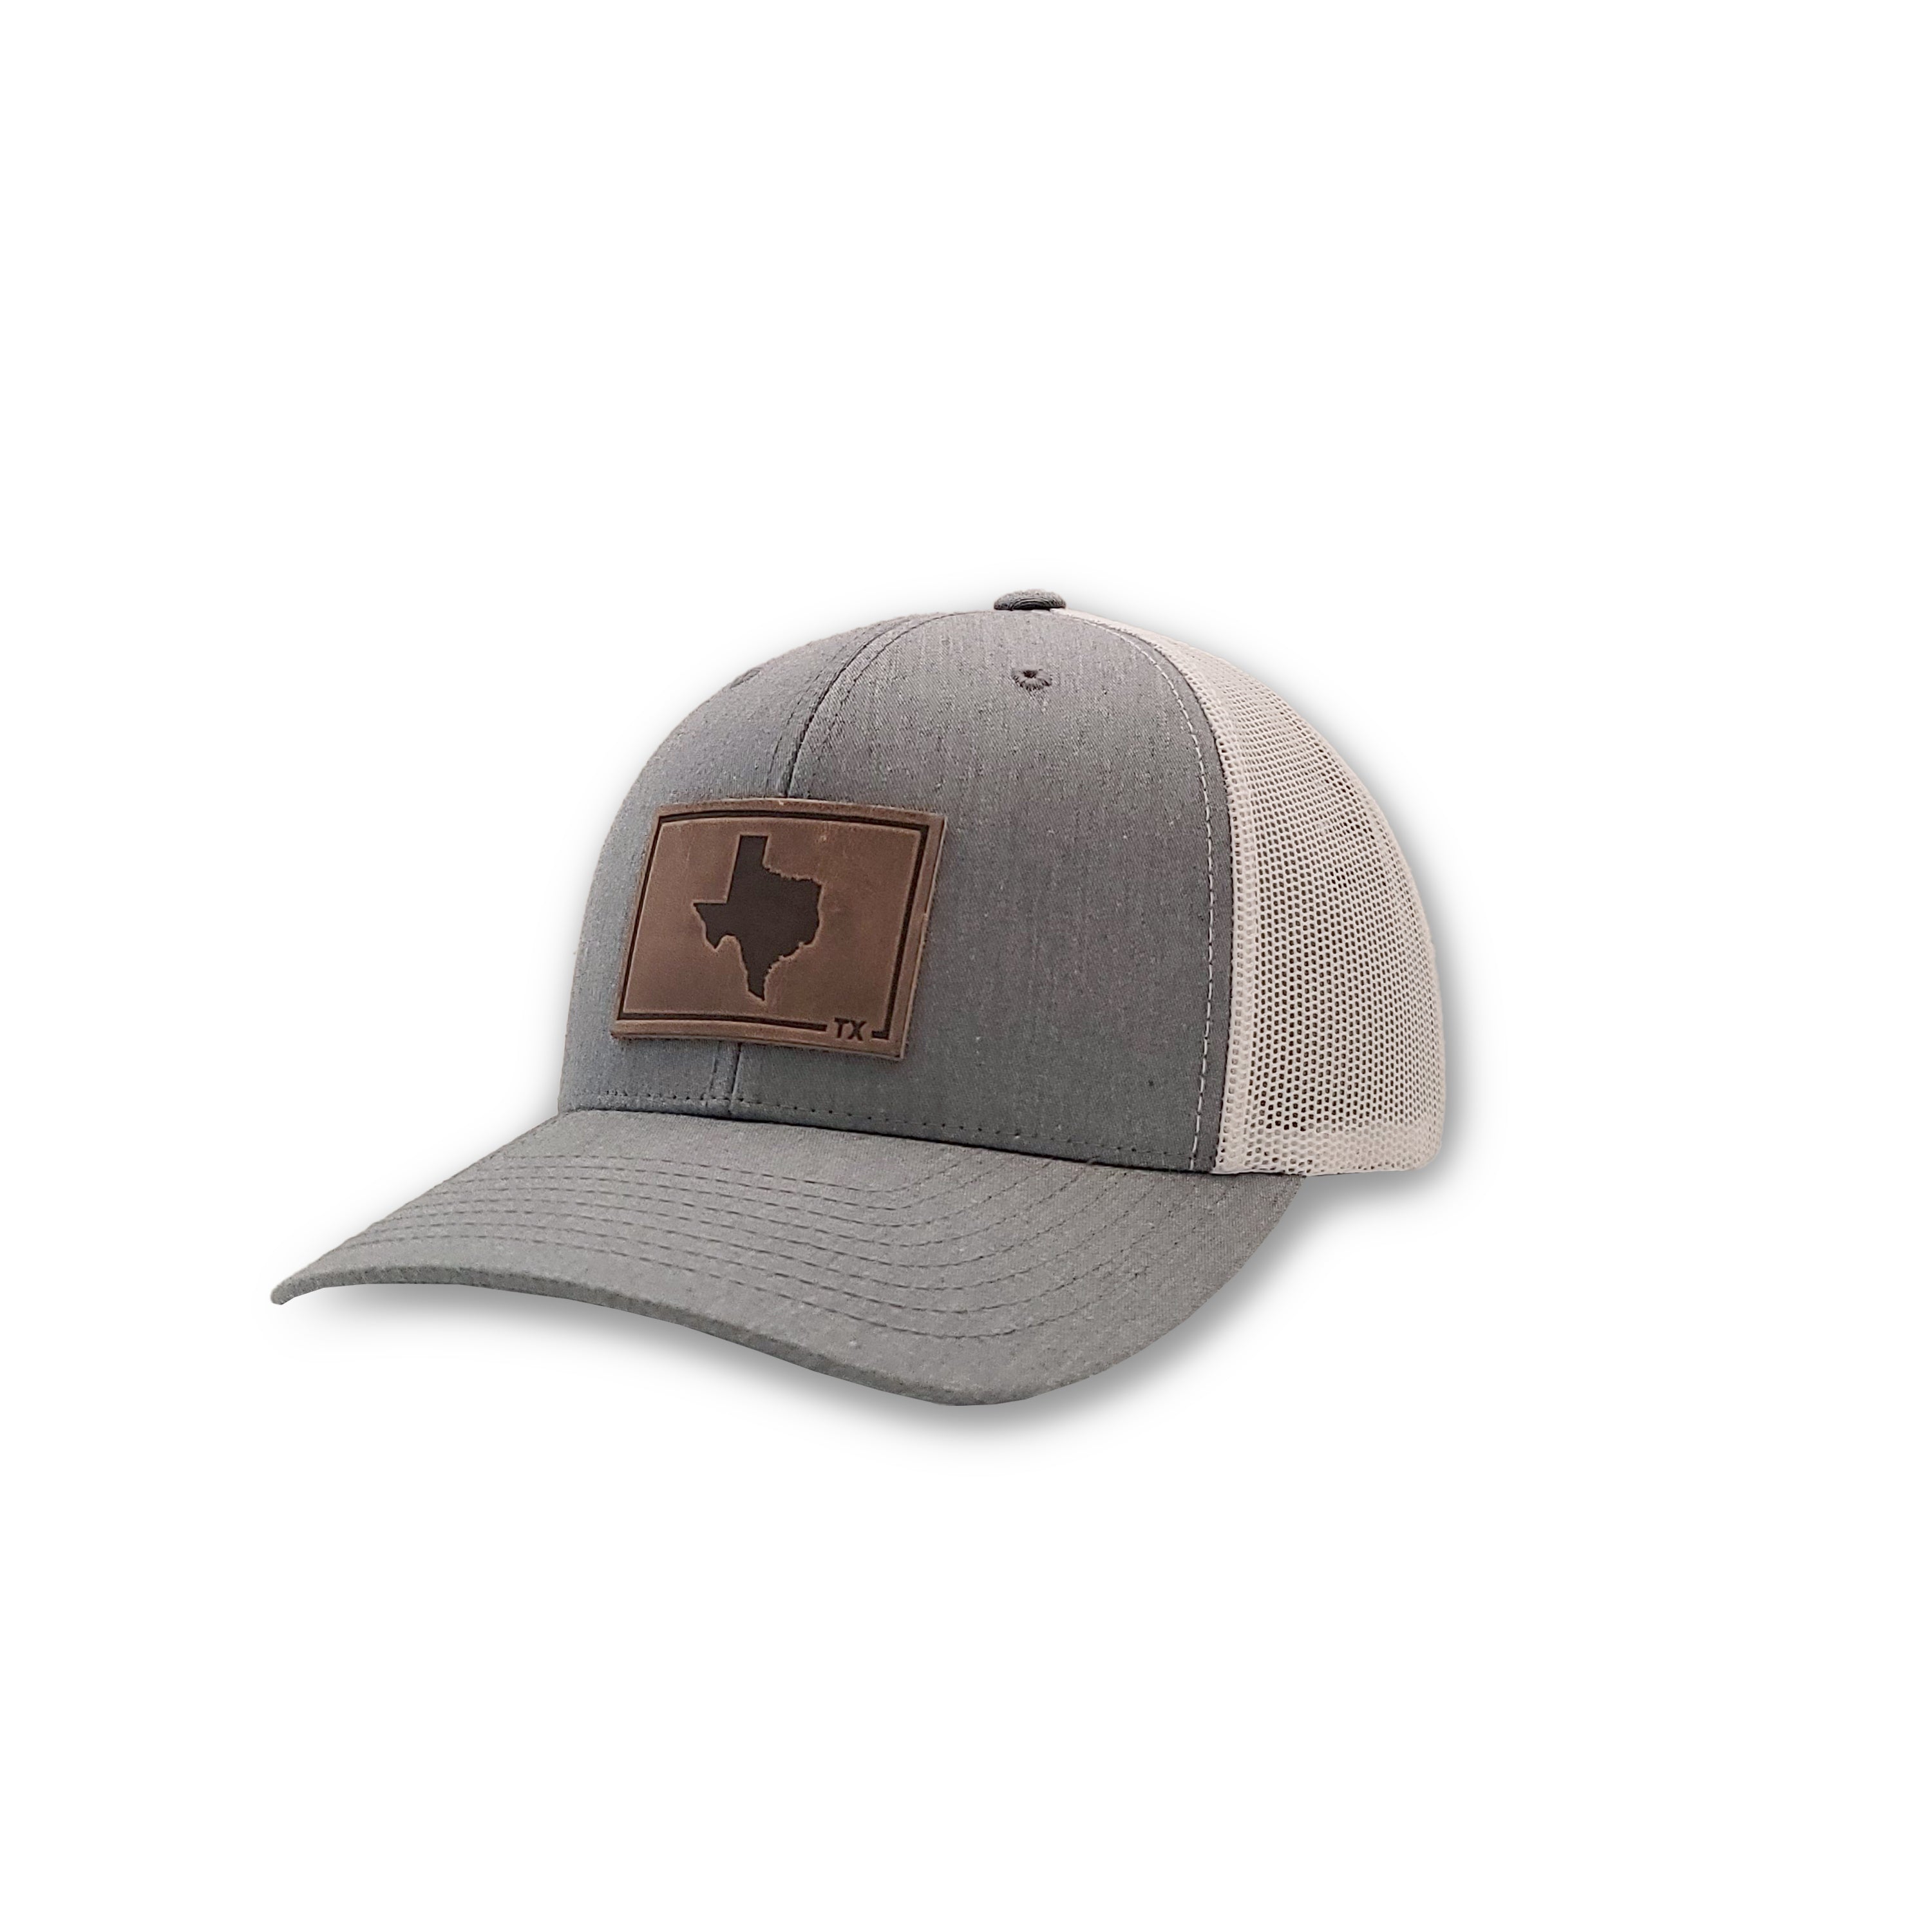 Texas Leather Patch hat by Range Leather Co.